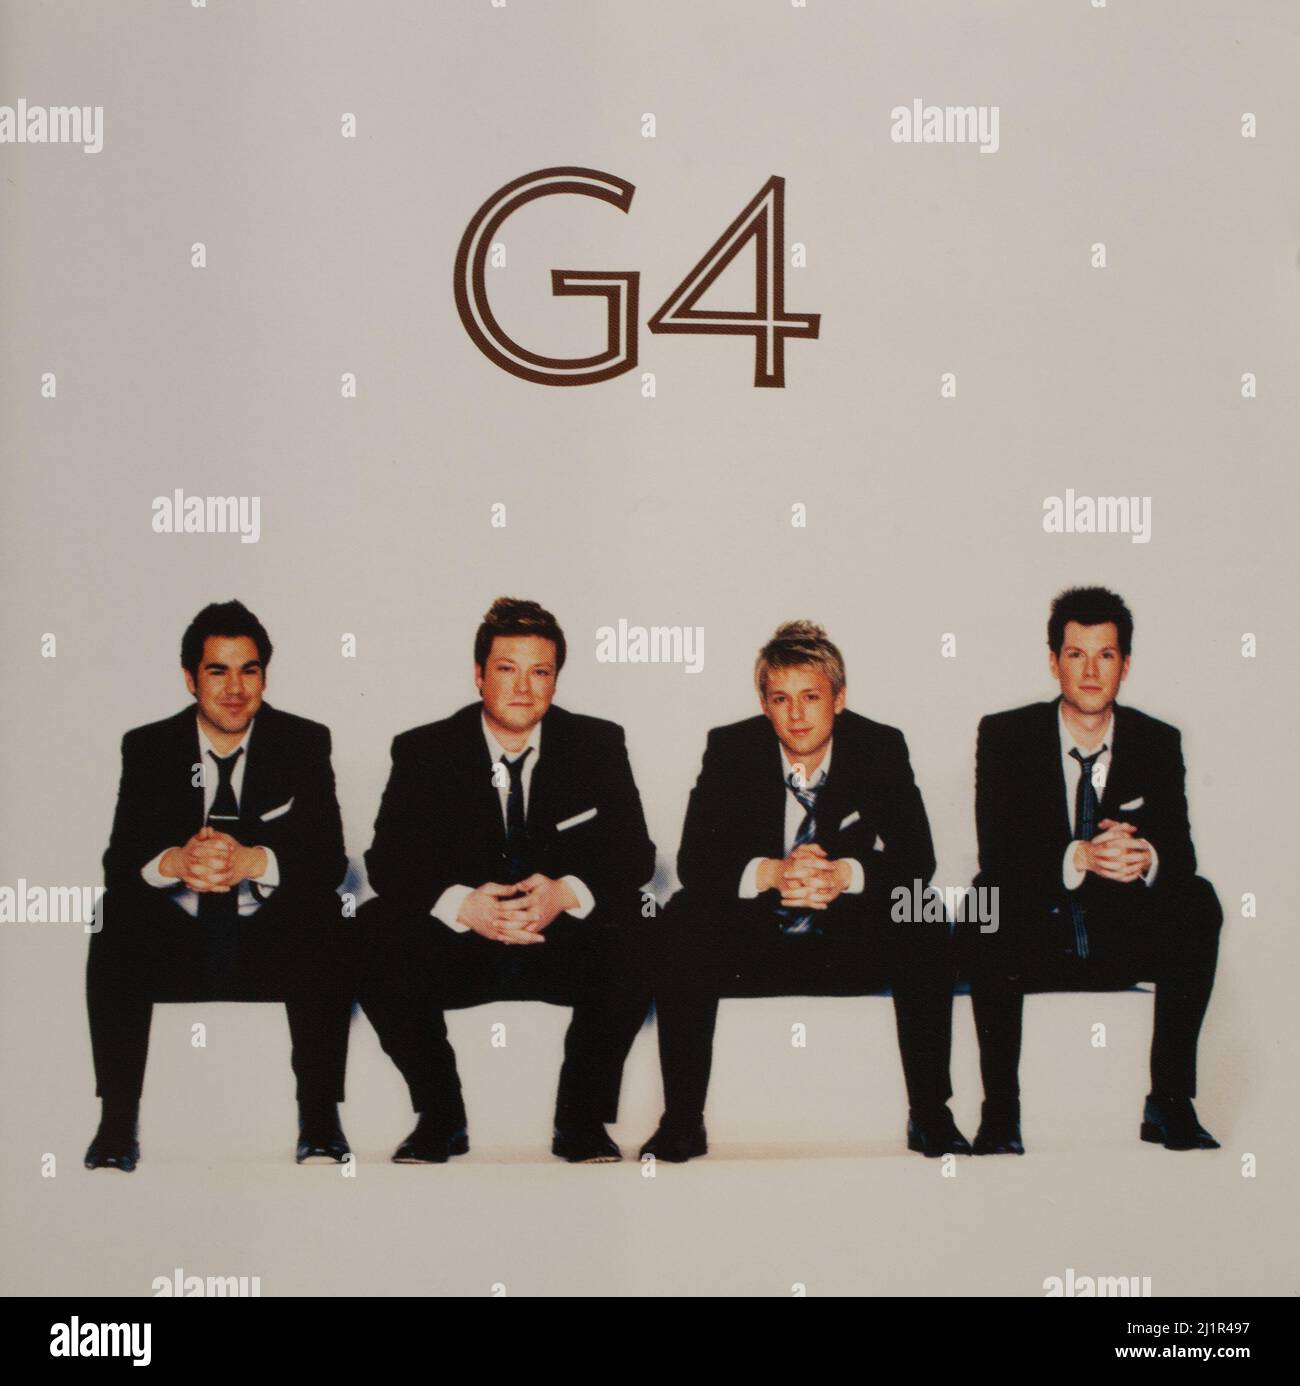 The Cd album cover to G4 by G4 Stock Photo